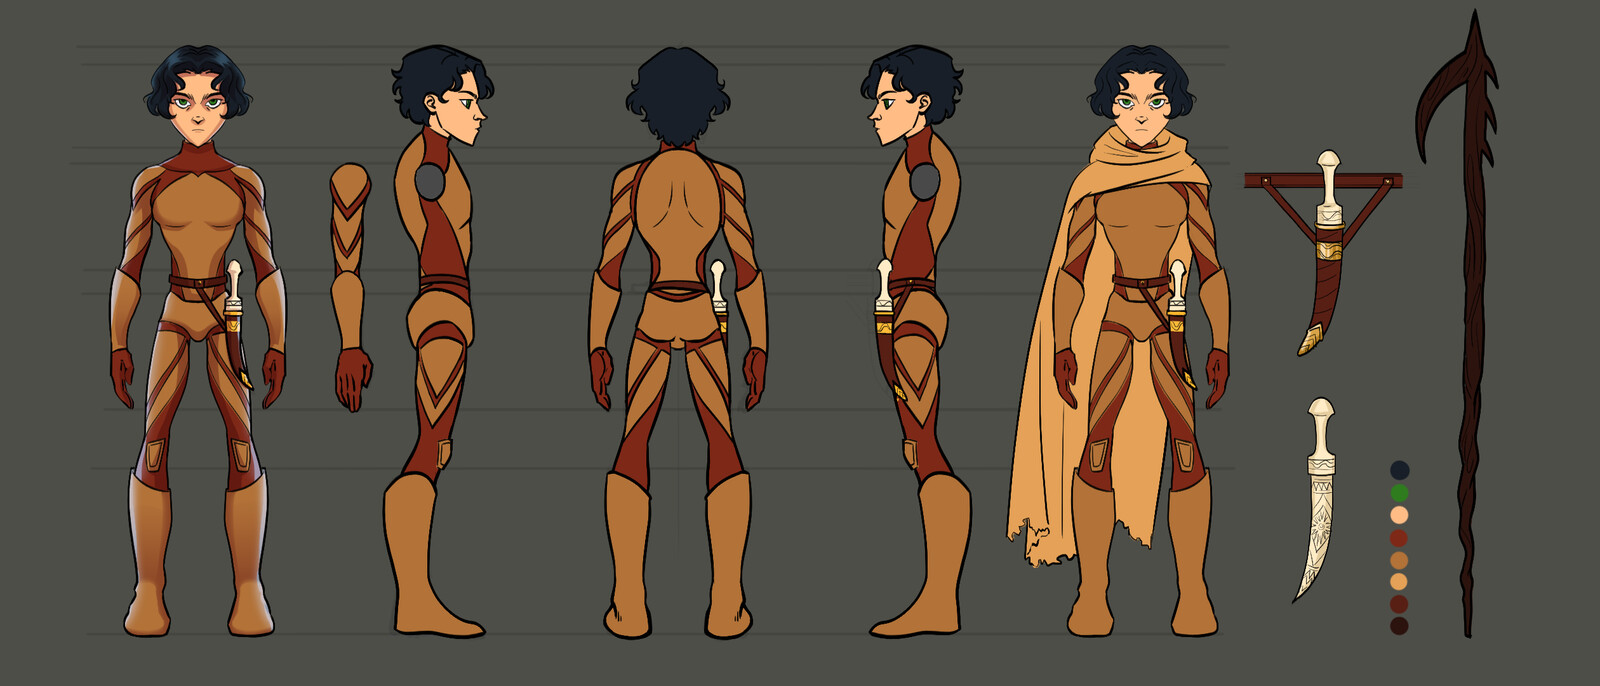 Then I move to on costume details, including the choice of materials. Finally, do a detailed turnaround of the character.